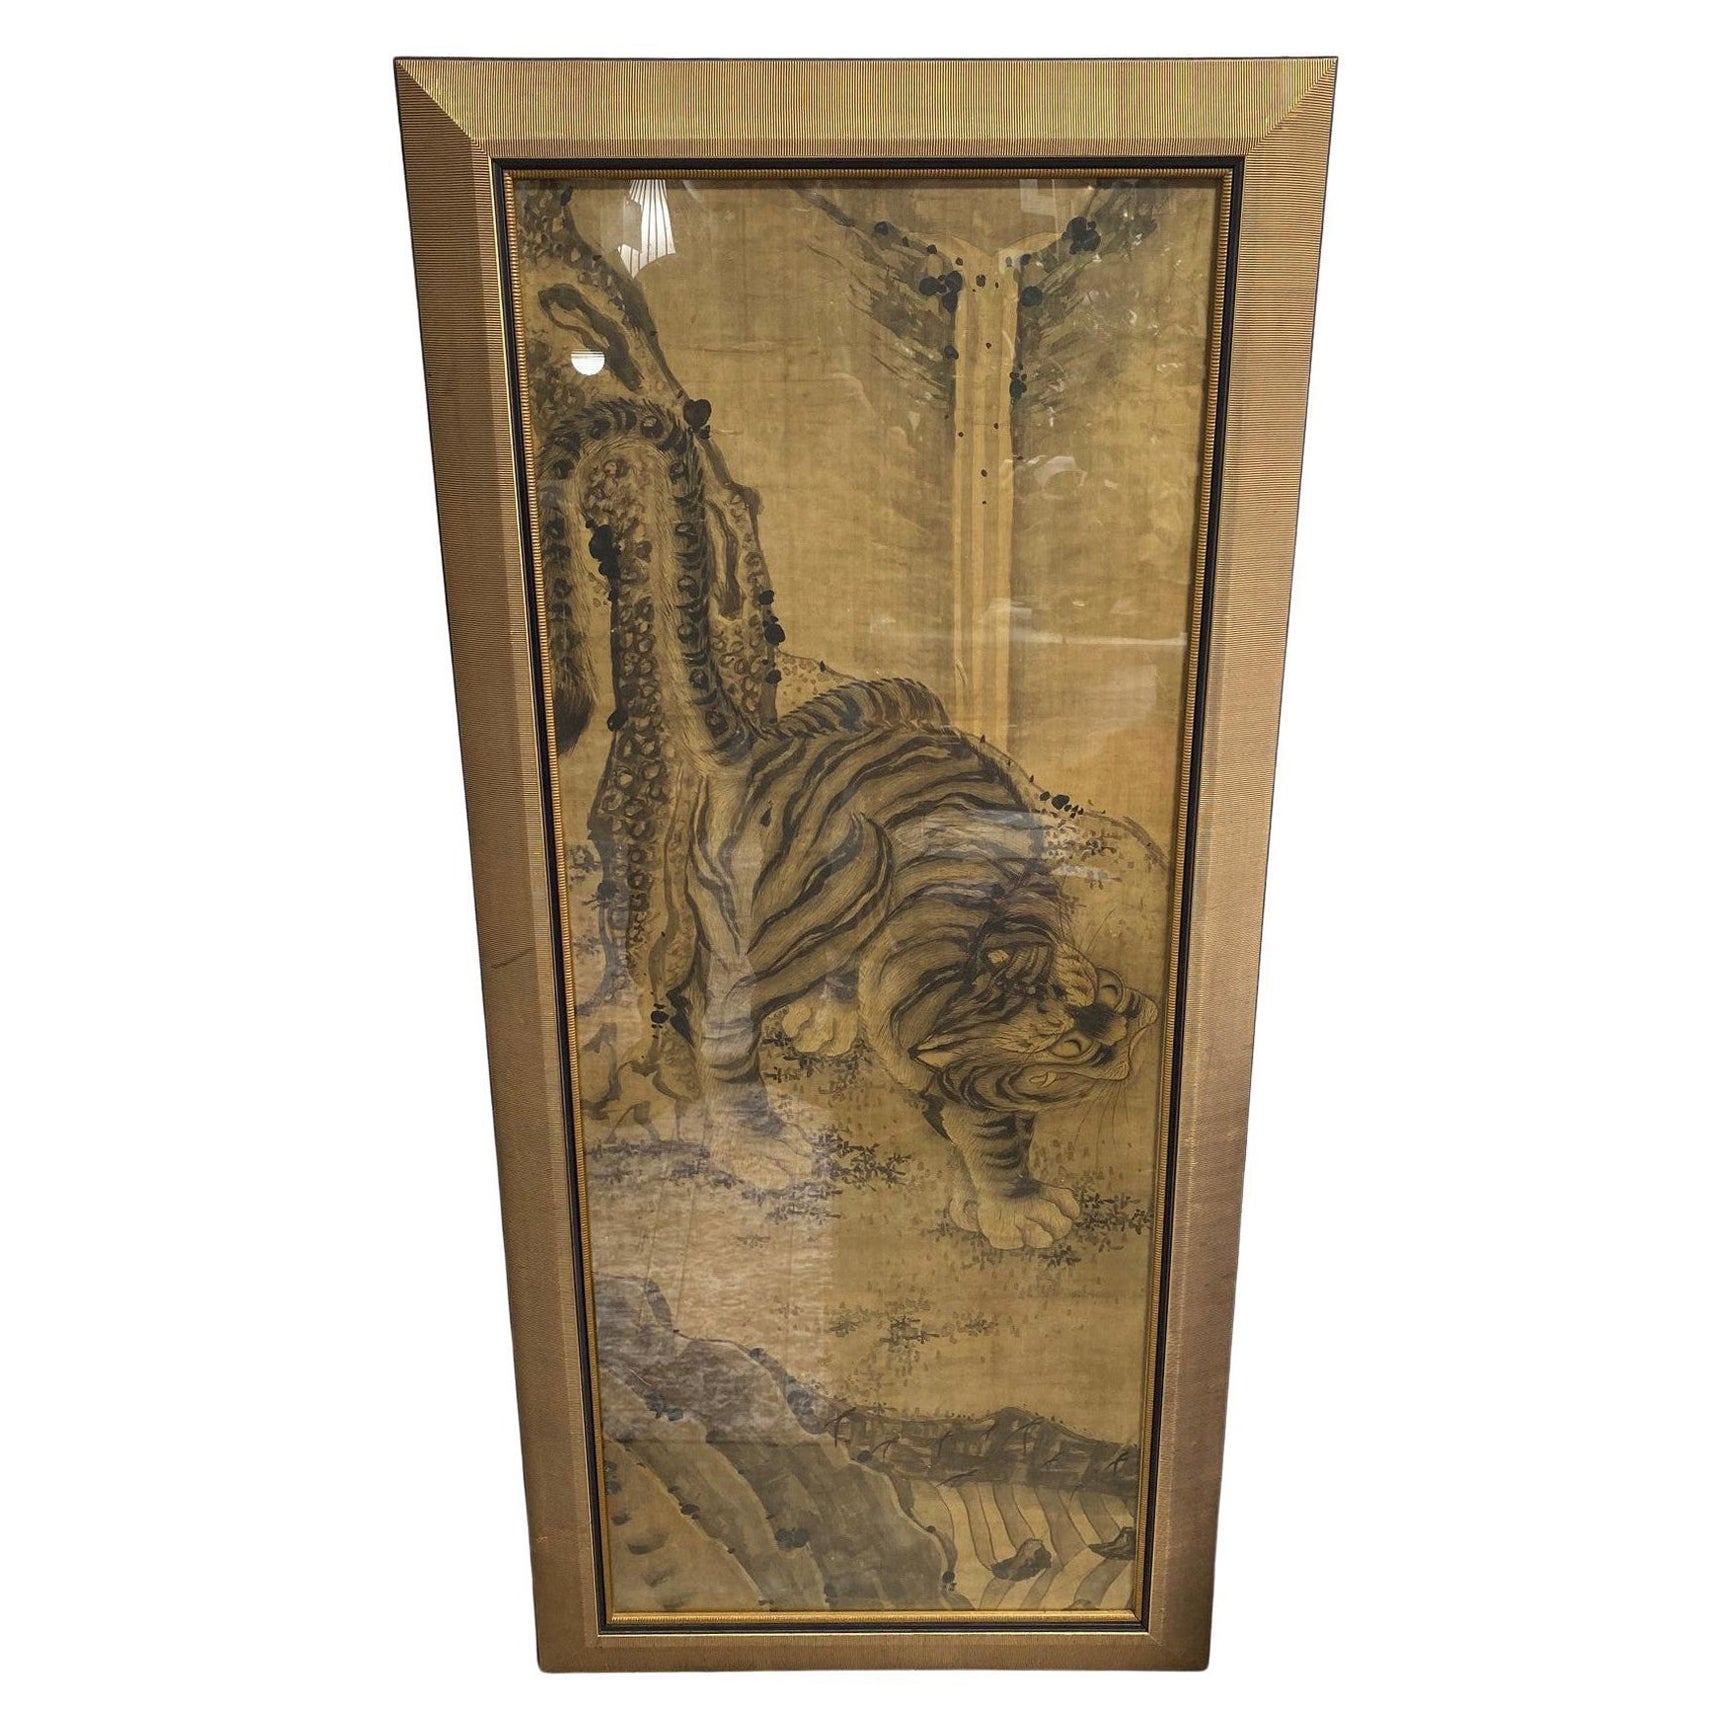 Japanese Asian Large Edo Period Framed Hand Painted Tiger Scroll